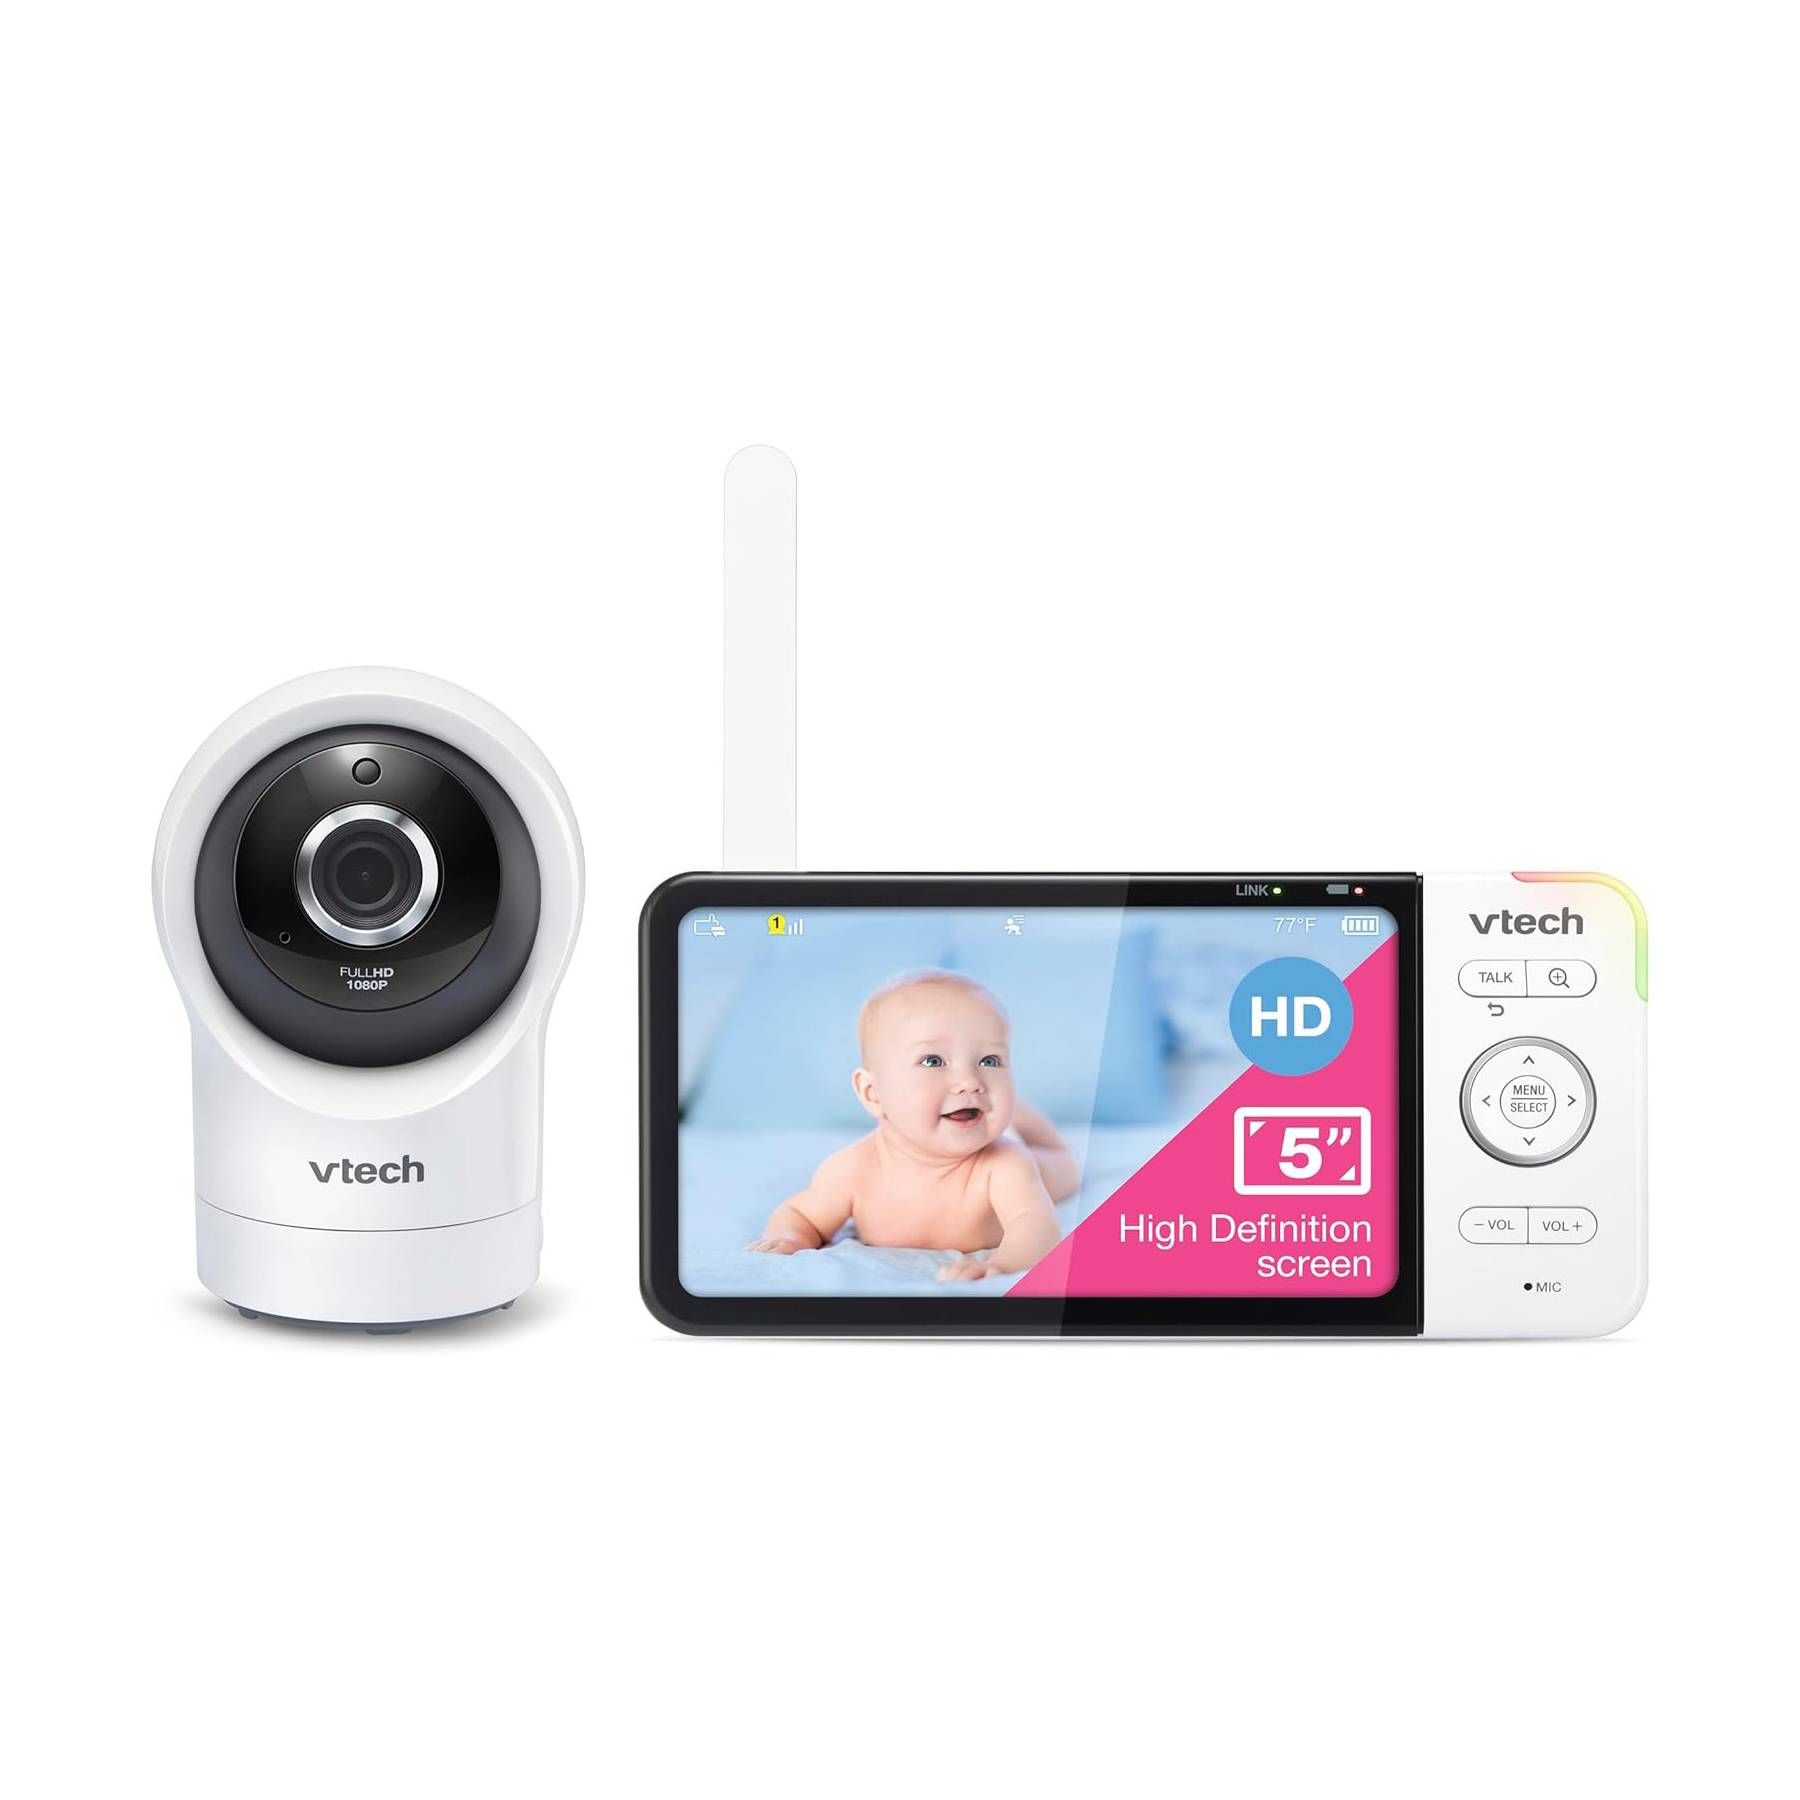 VTech RM5764HD 1080p Smart WiFi Remote Access Baby Monitor